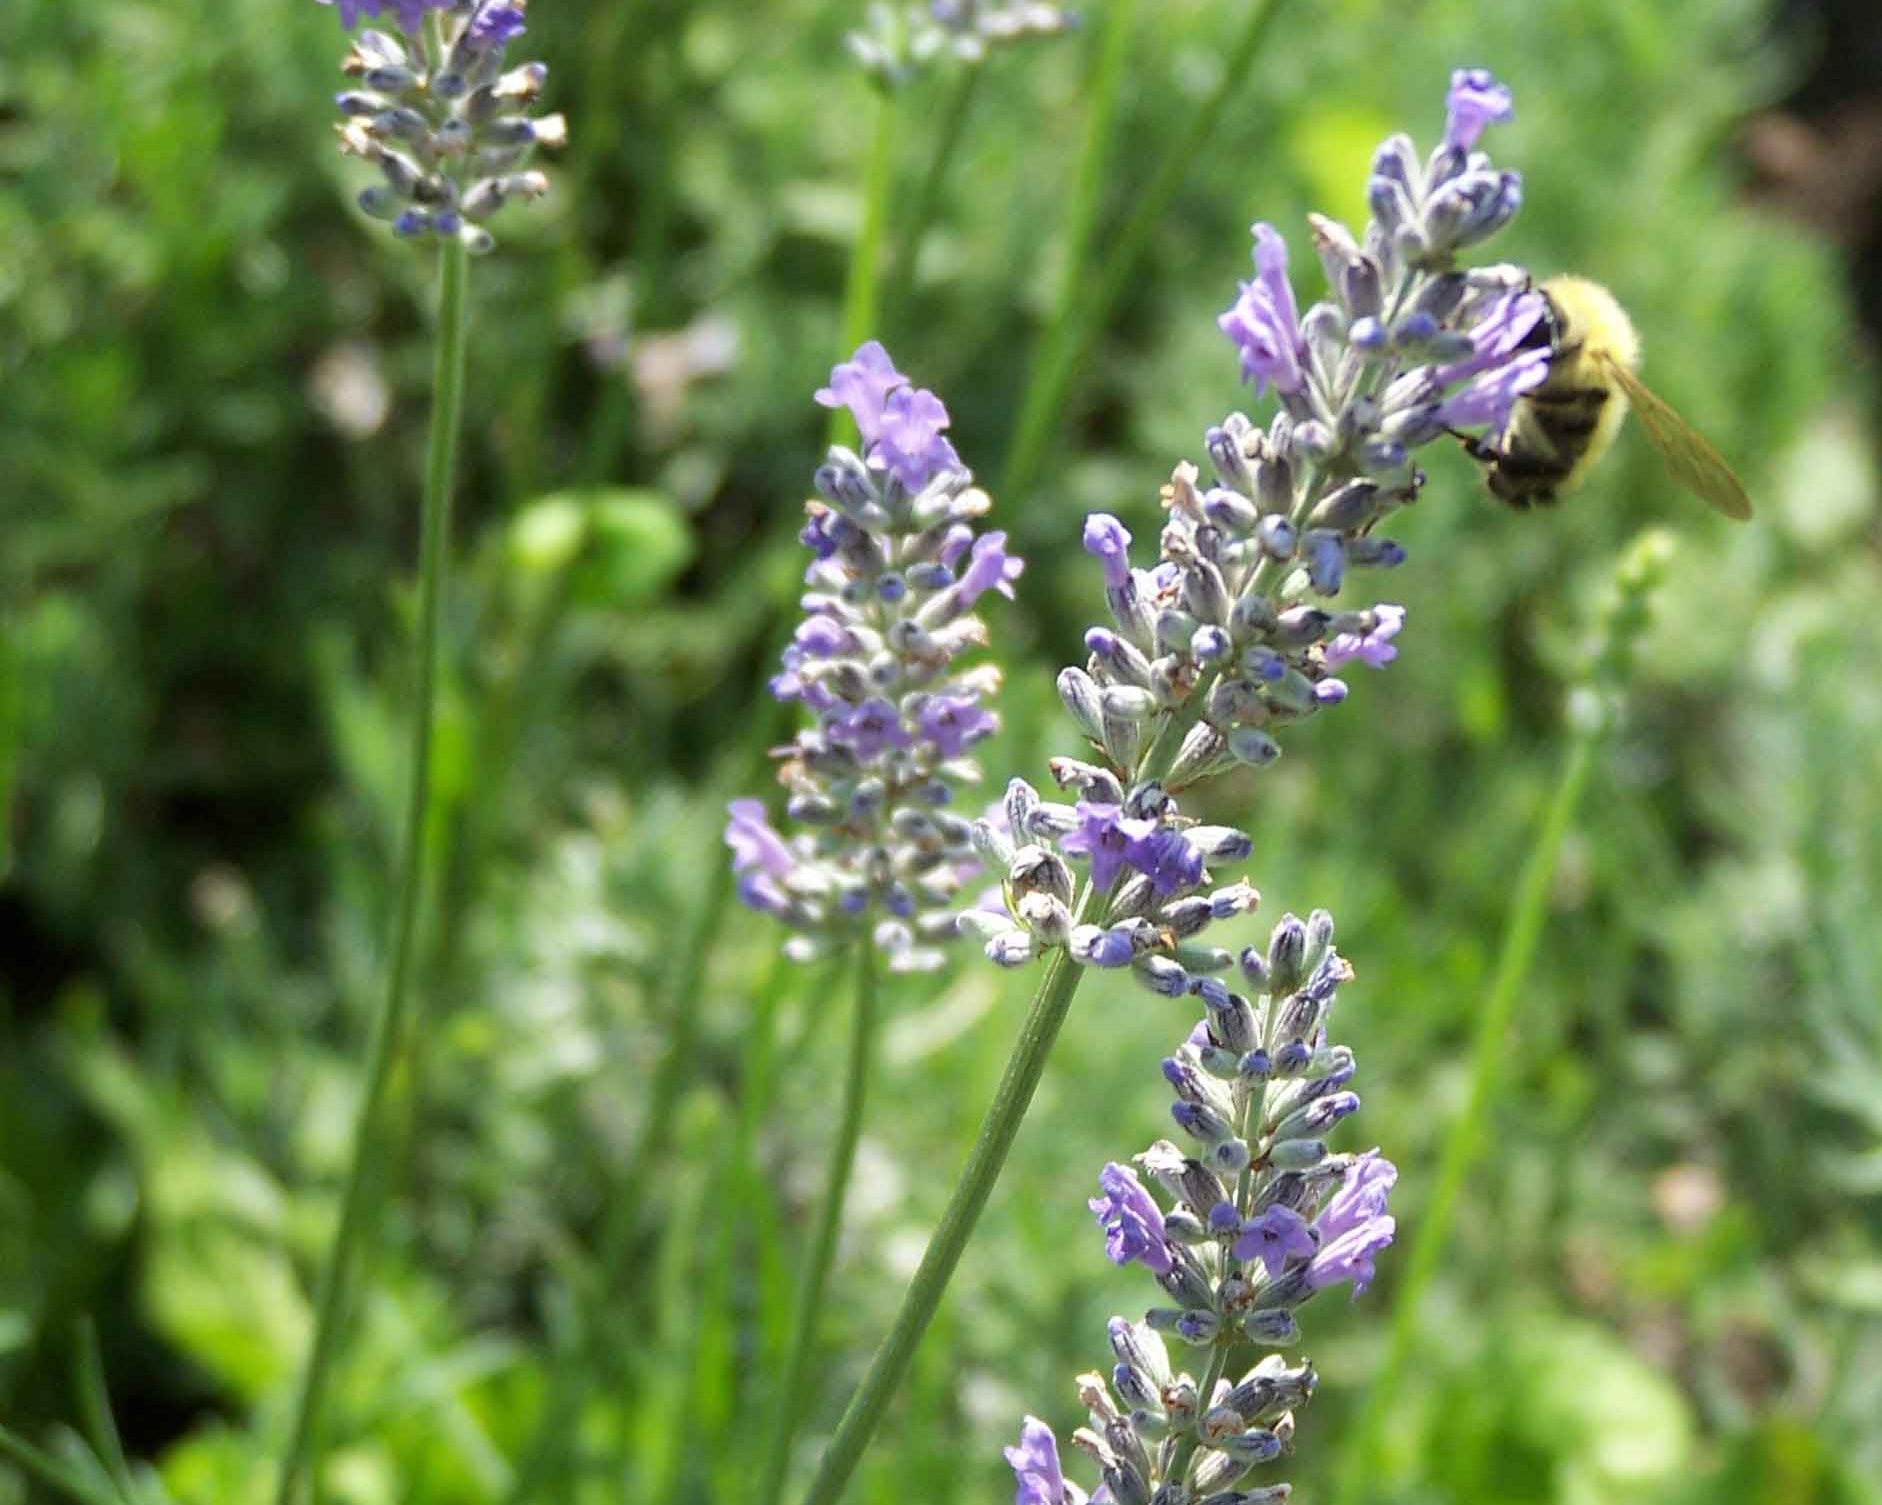 Vermont Lavender LLC lavender herb garden being visited by a busy bumble bee - munstead lavender growing lavender in a cold climate